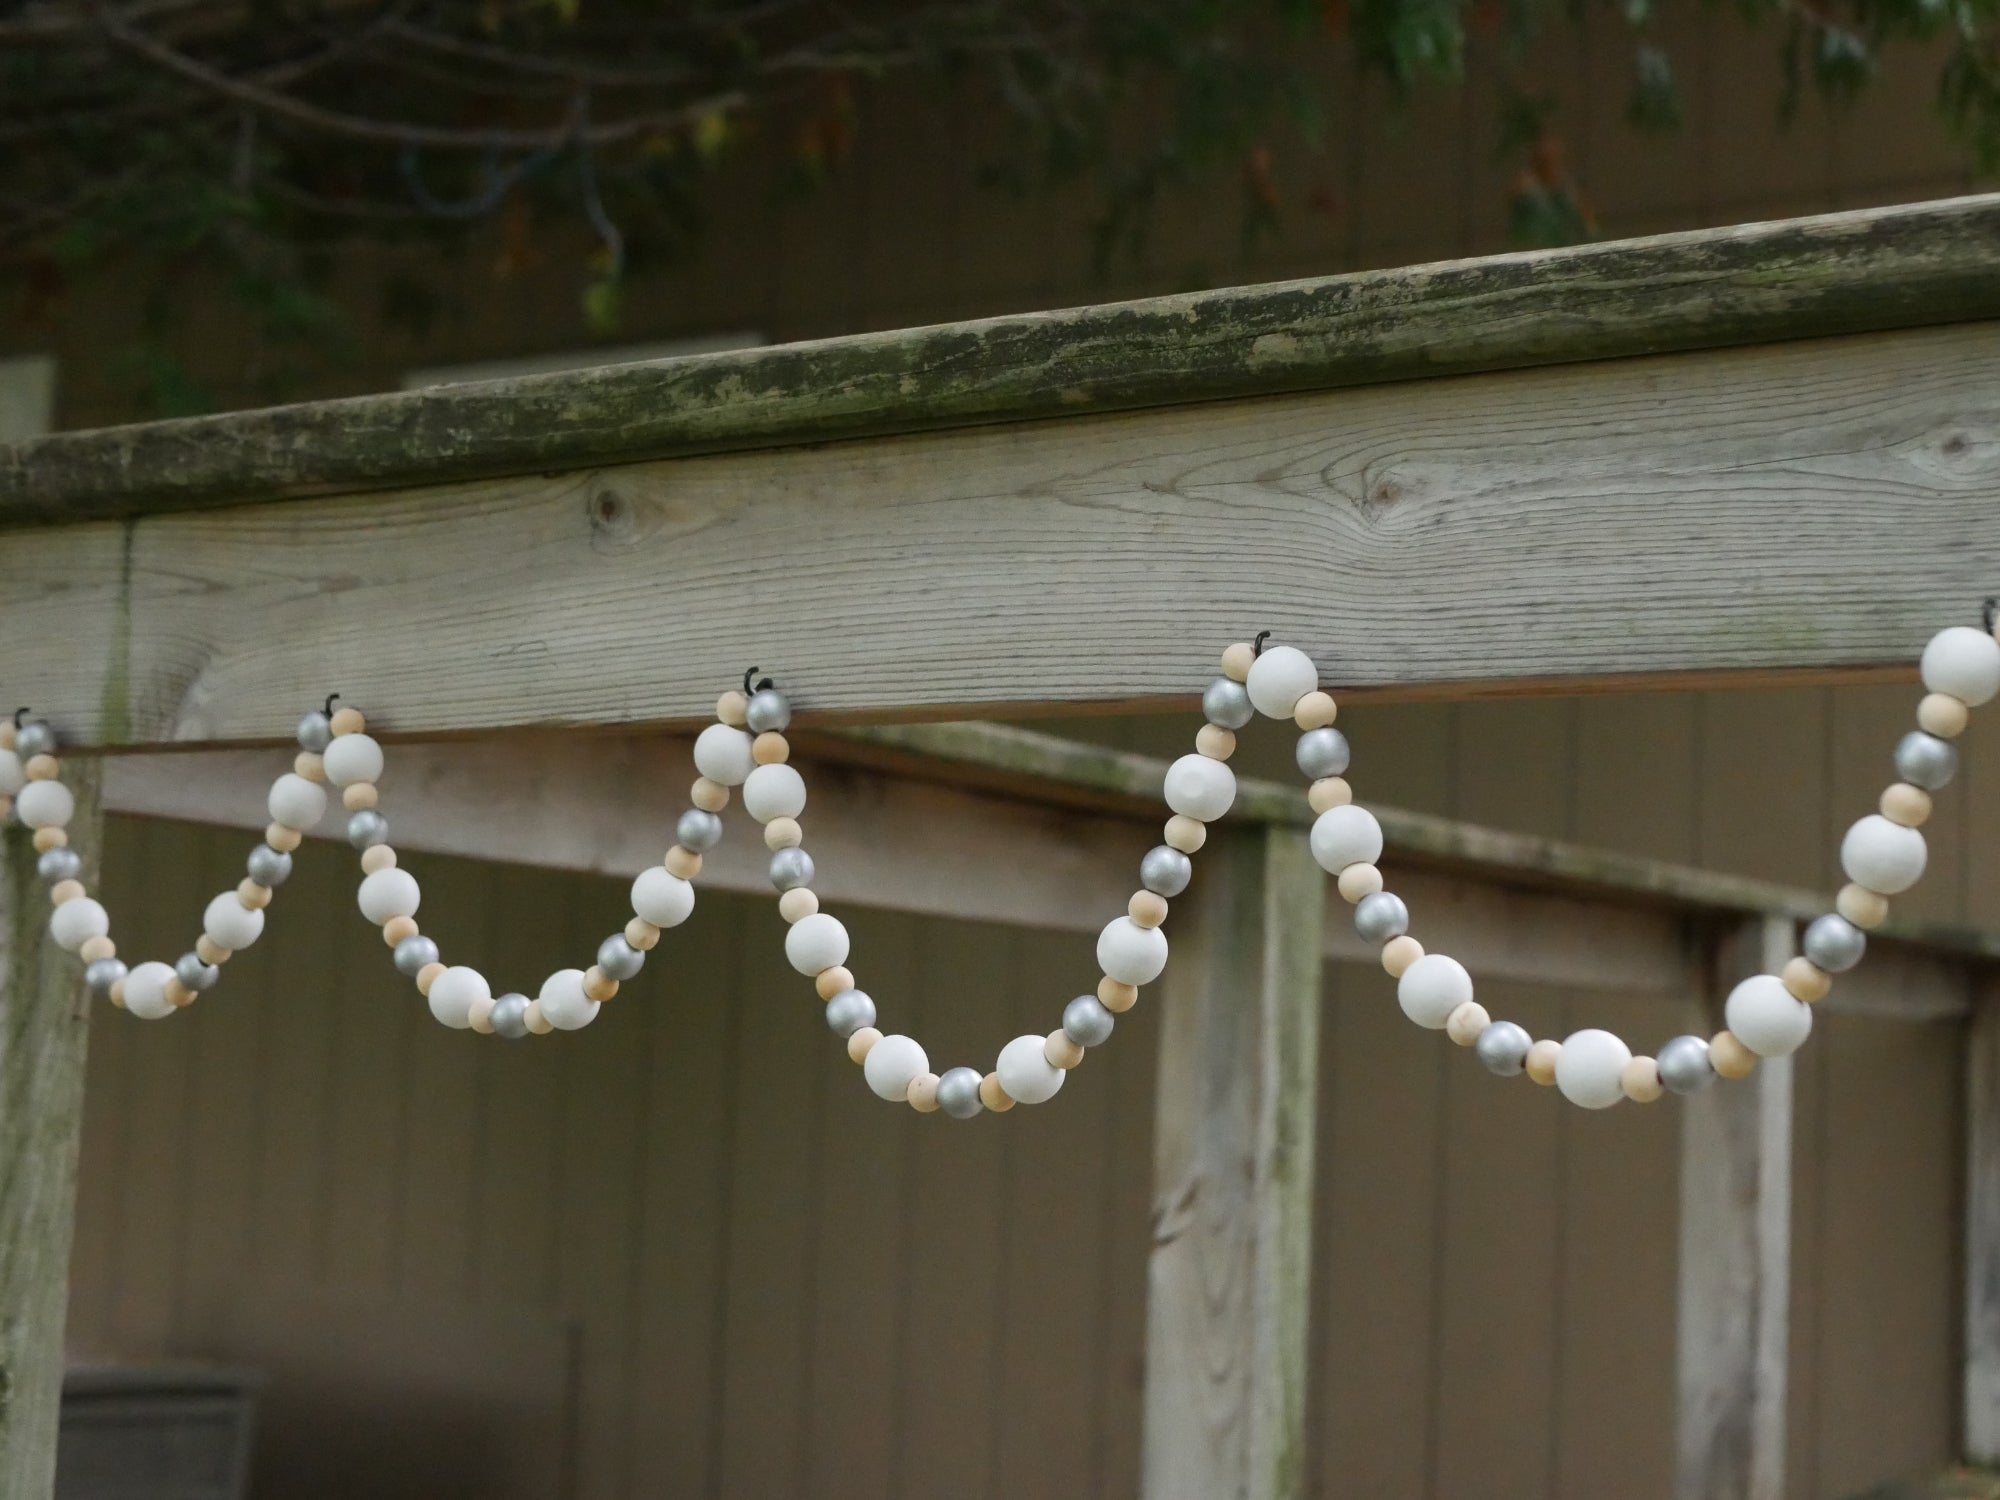 Whitewashed Wood Bead Garland by Factory Direct Craft - White Washed Wooden  Bead Garland for Christmas Tree Decoration - for Rustic, Natural